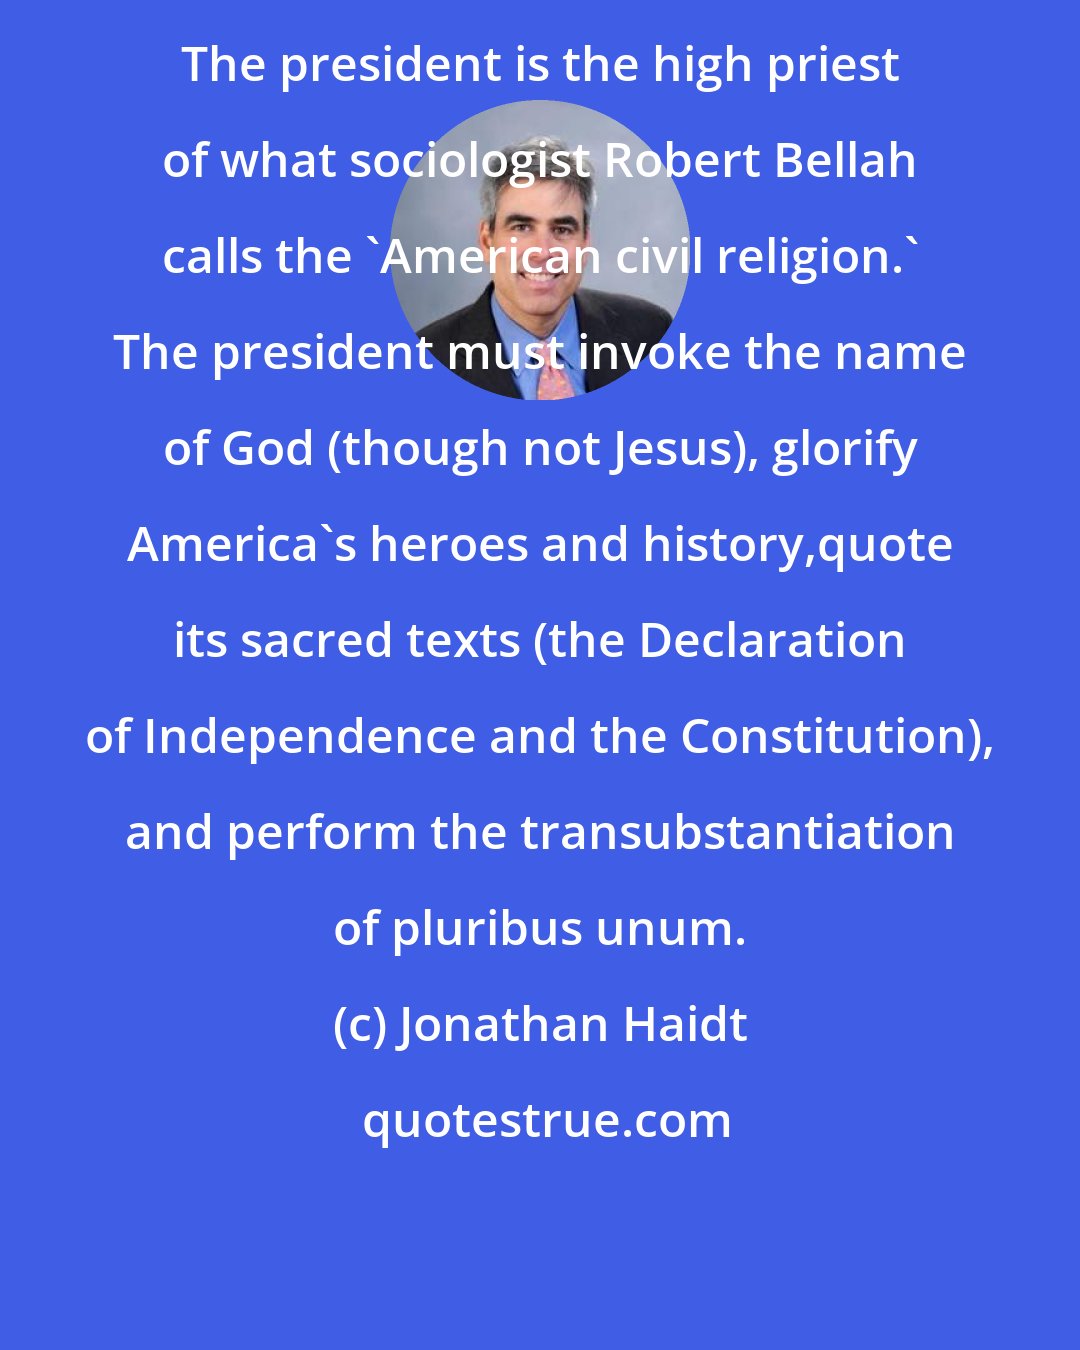 Jonathan Haidt: The president is the high priest of what sociologist Robert Bellah calls the 'American civil religion.' The president must invoke the name of God (though not Jesus), glorify America's heroes and history,quote its sacred texts (the Declaration of Independence and the Constitution), and perform the transubstantiation of pluribus unum.